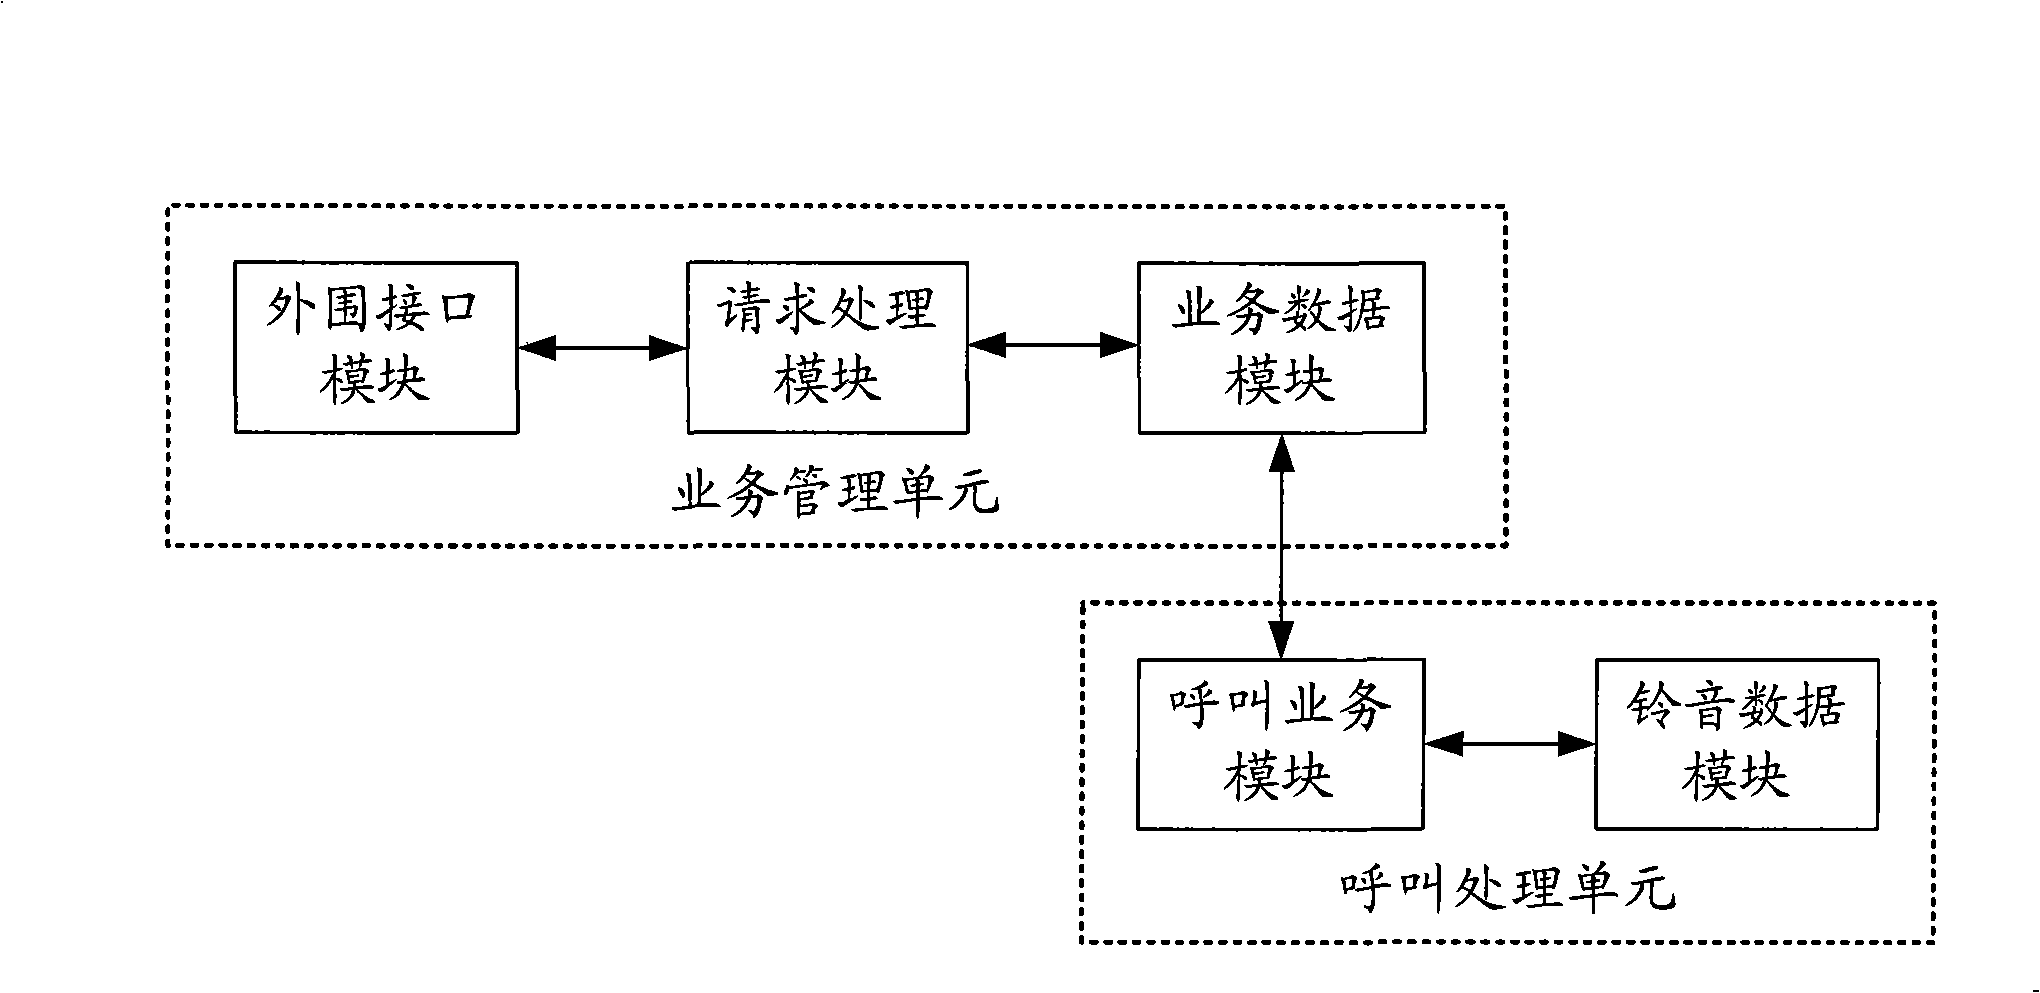 Method for implementing selective rejection of incoming call, and multimedia ring service system